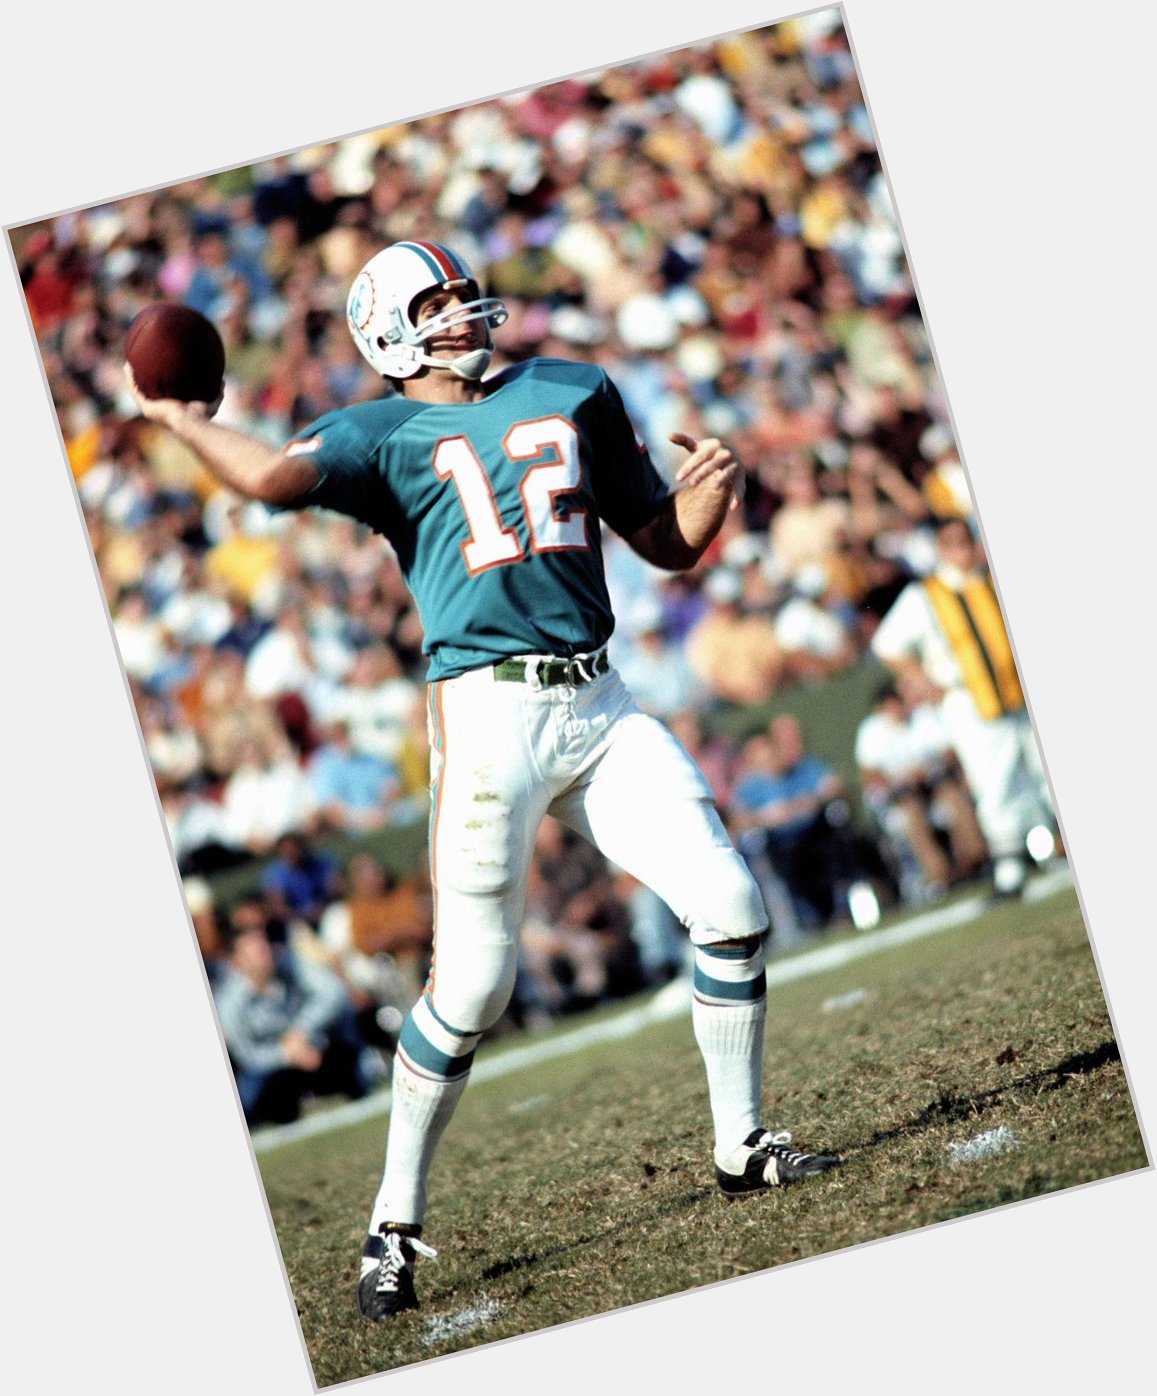 Happy Birthday to Bob Griese, who turns 70 today! 